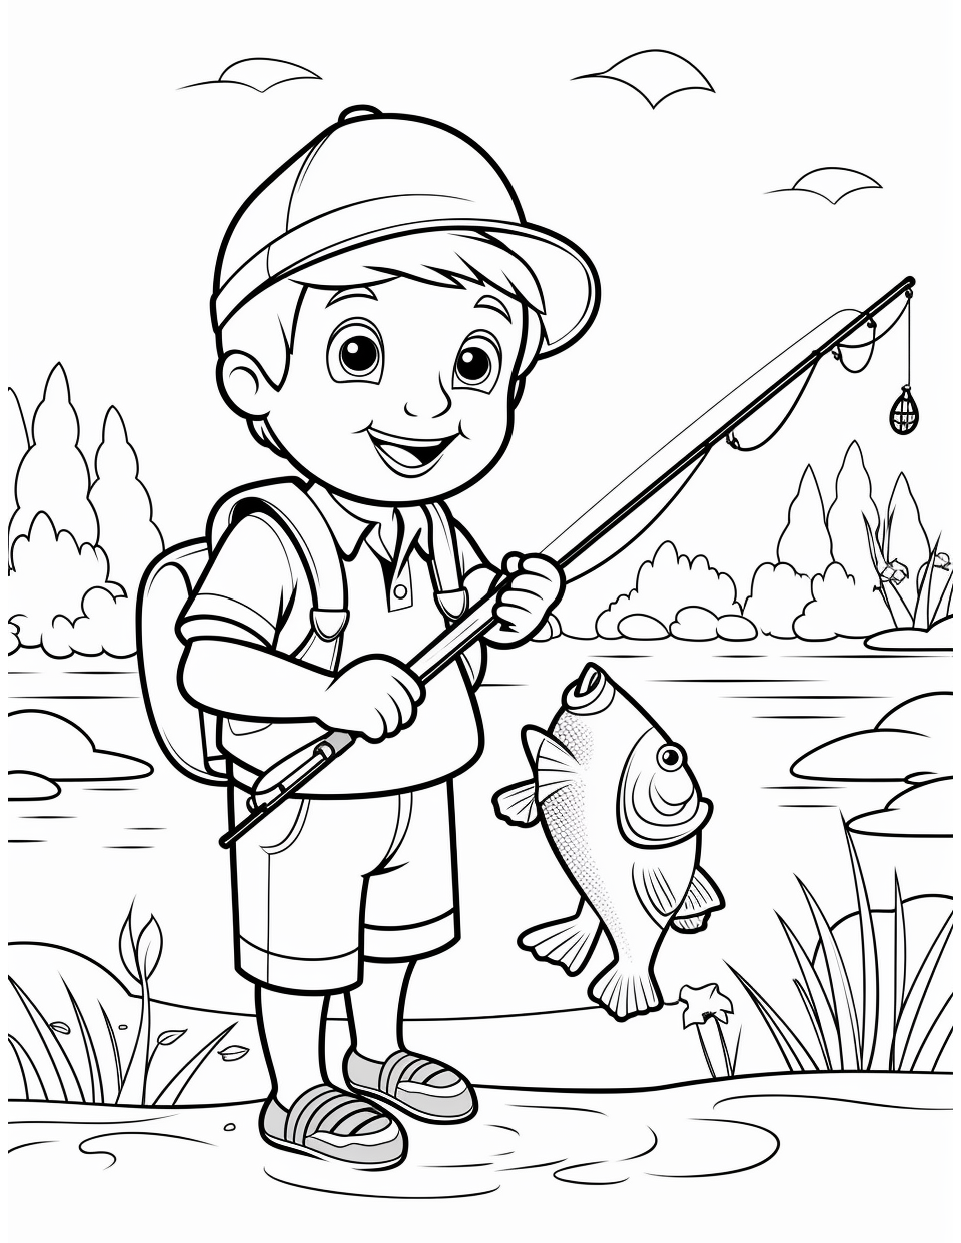 Fishing Coloring Page 15 - Line drawing of a boy with a fishing rod that's caught a fish